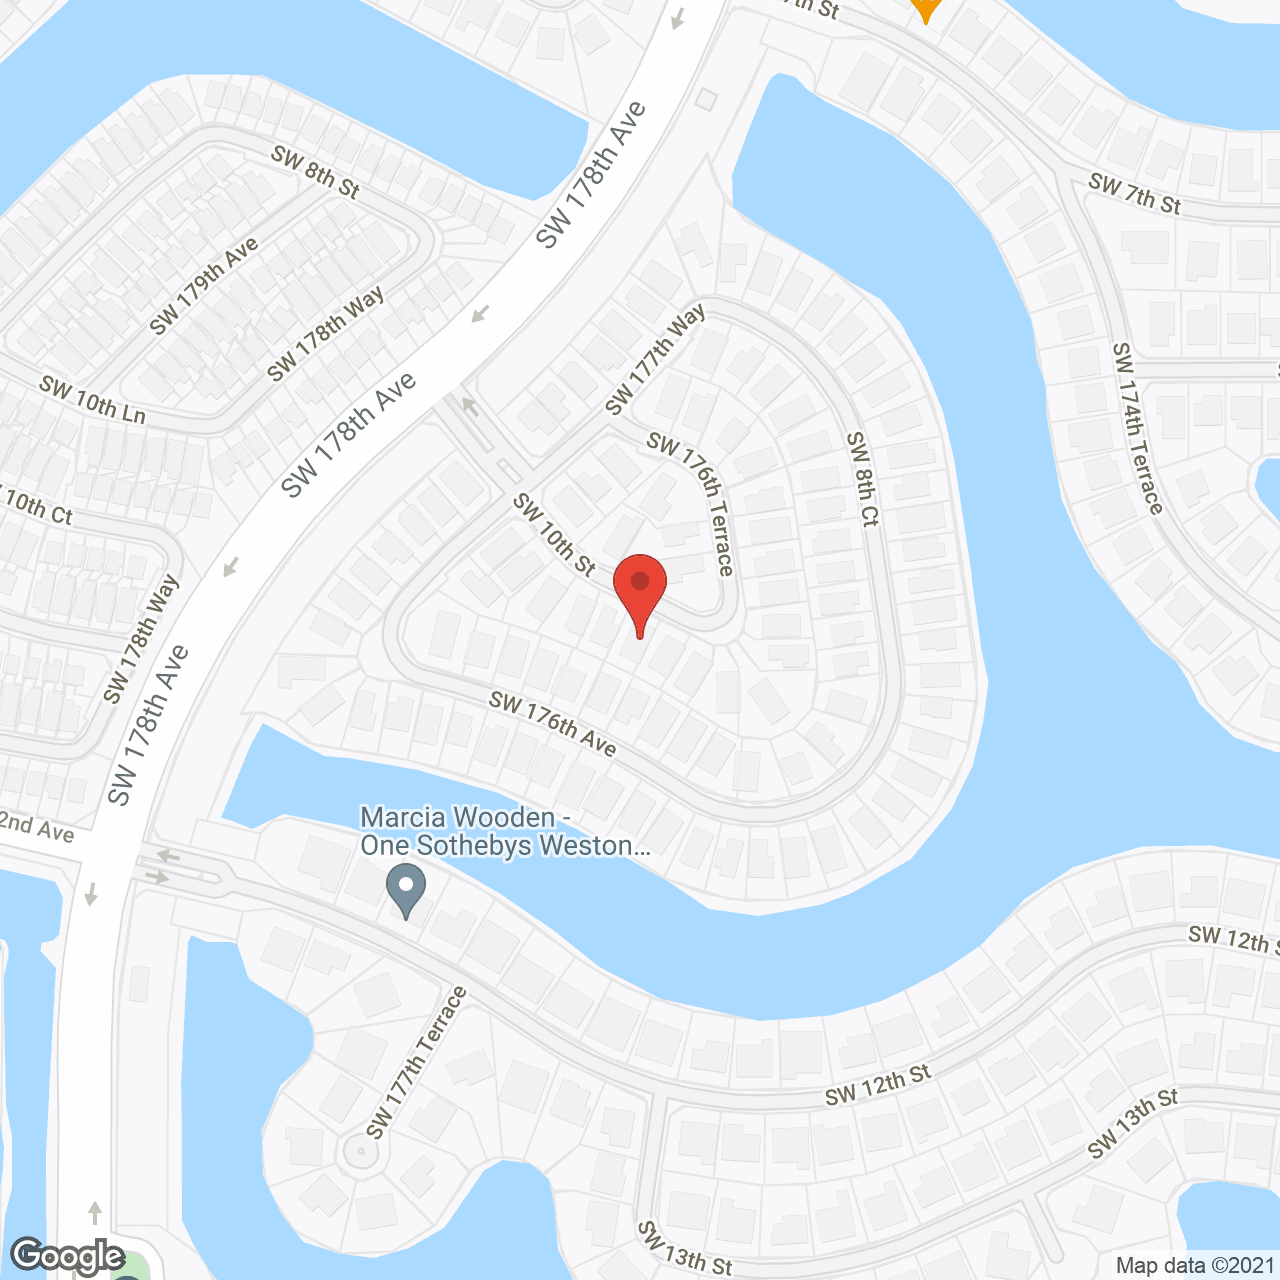 Assisted Living of Broward in google map